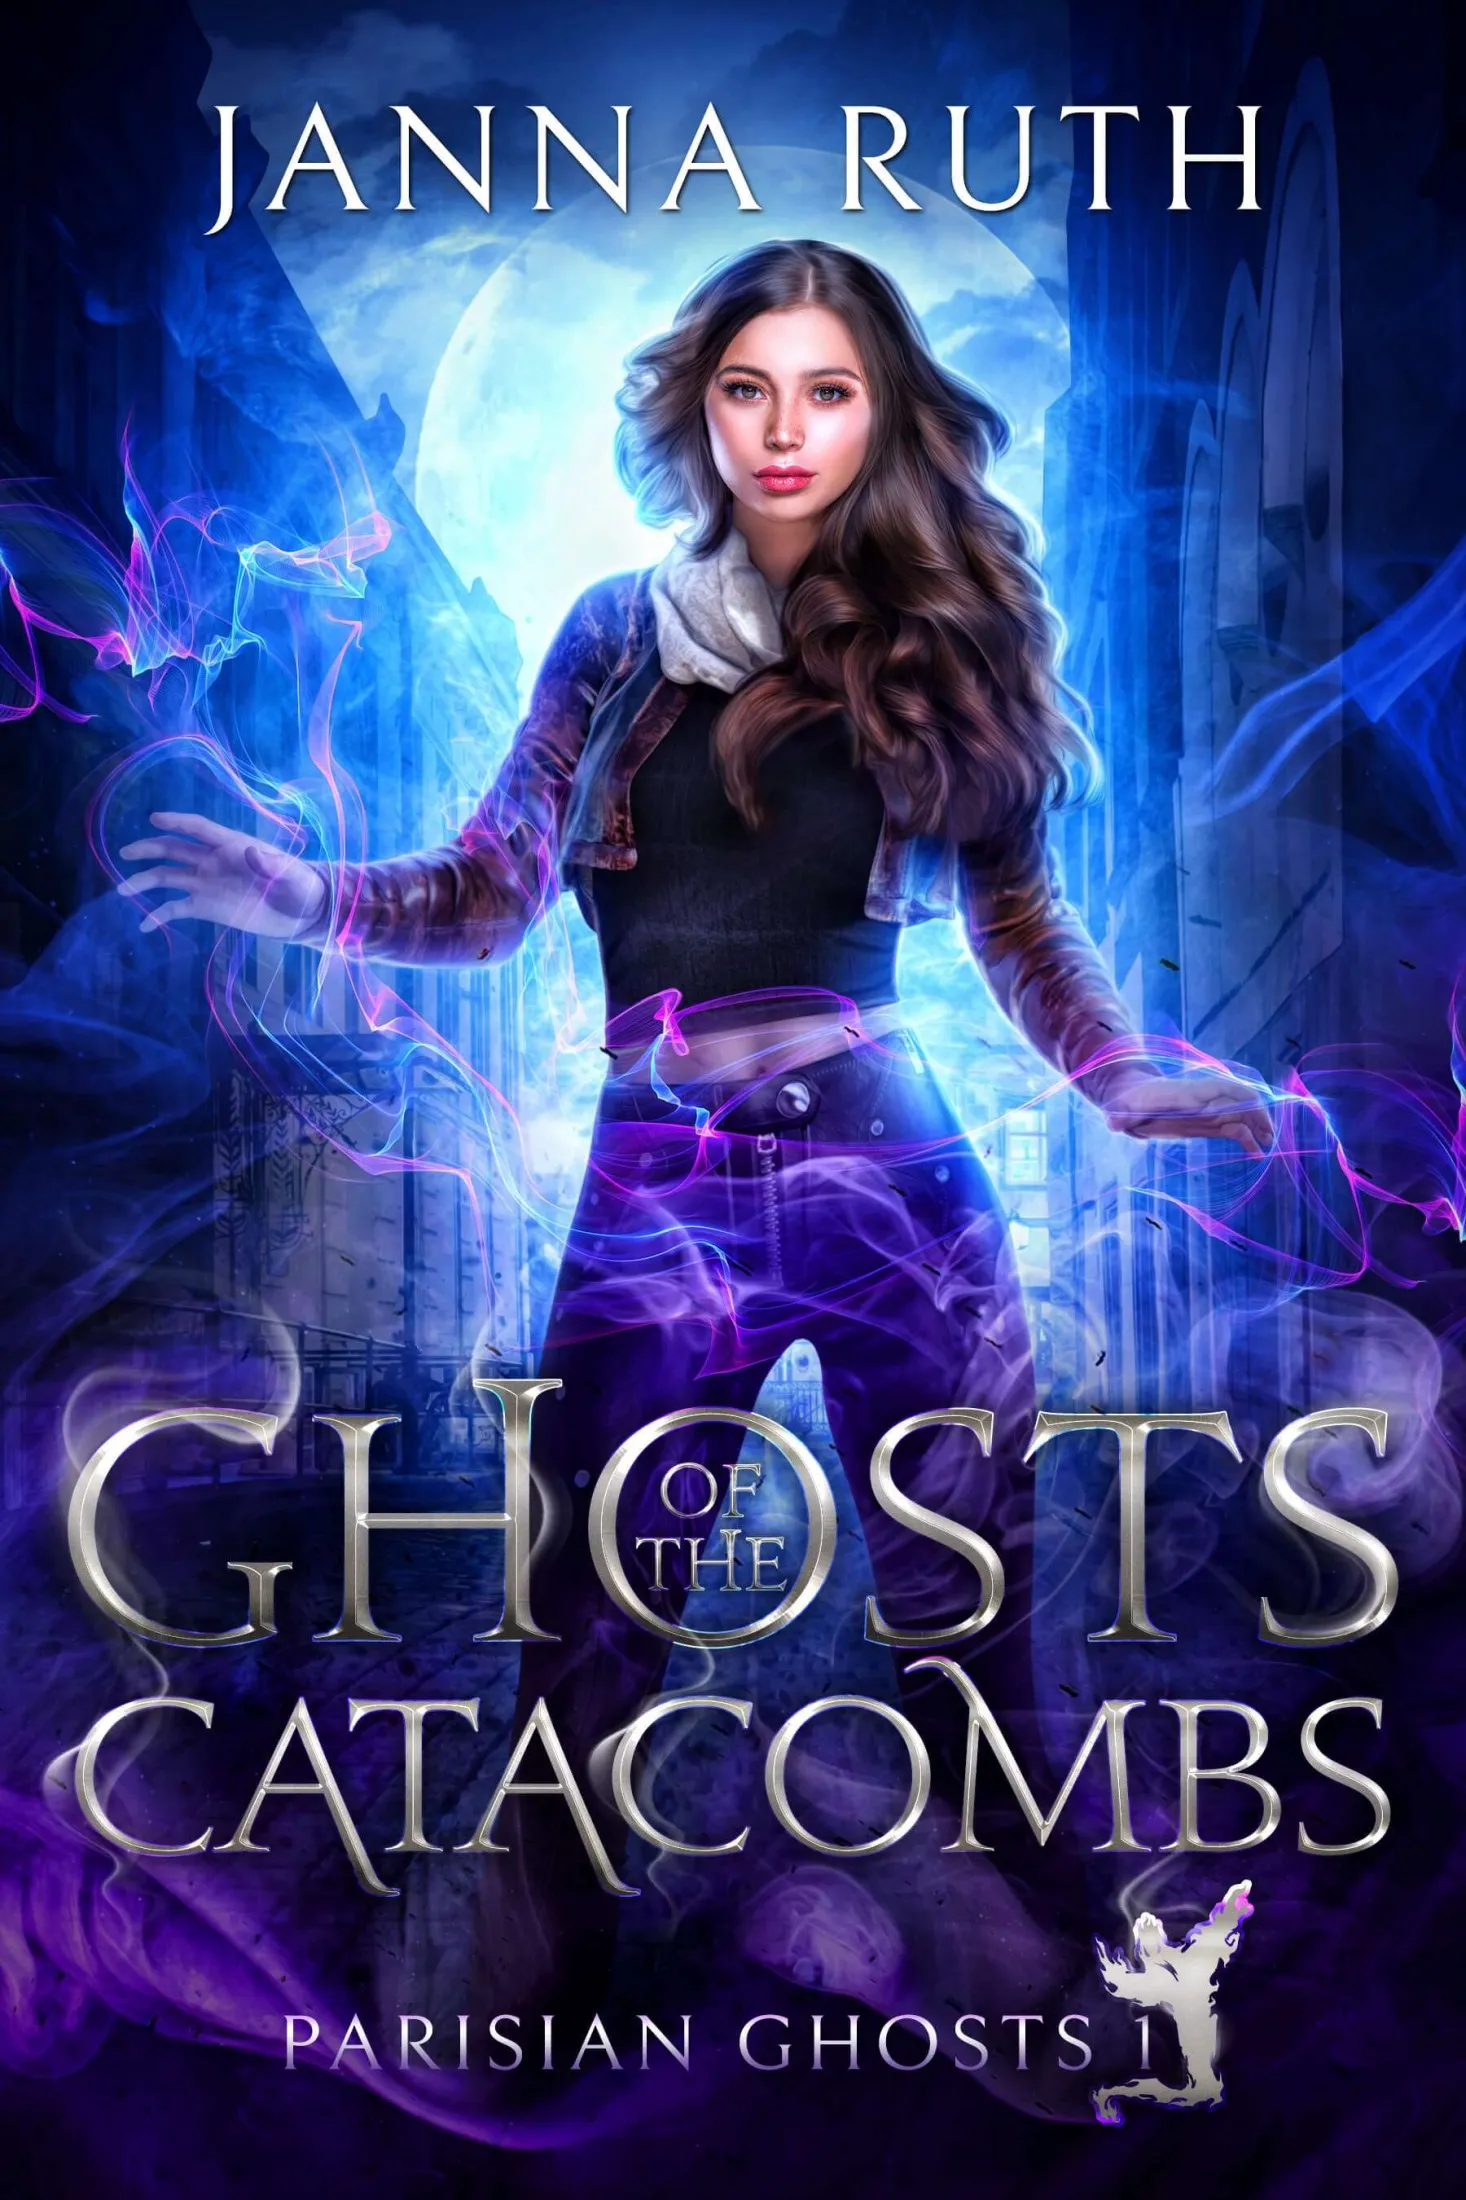 Ghosts of the Catacombs (Parisian Ghosts #1)